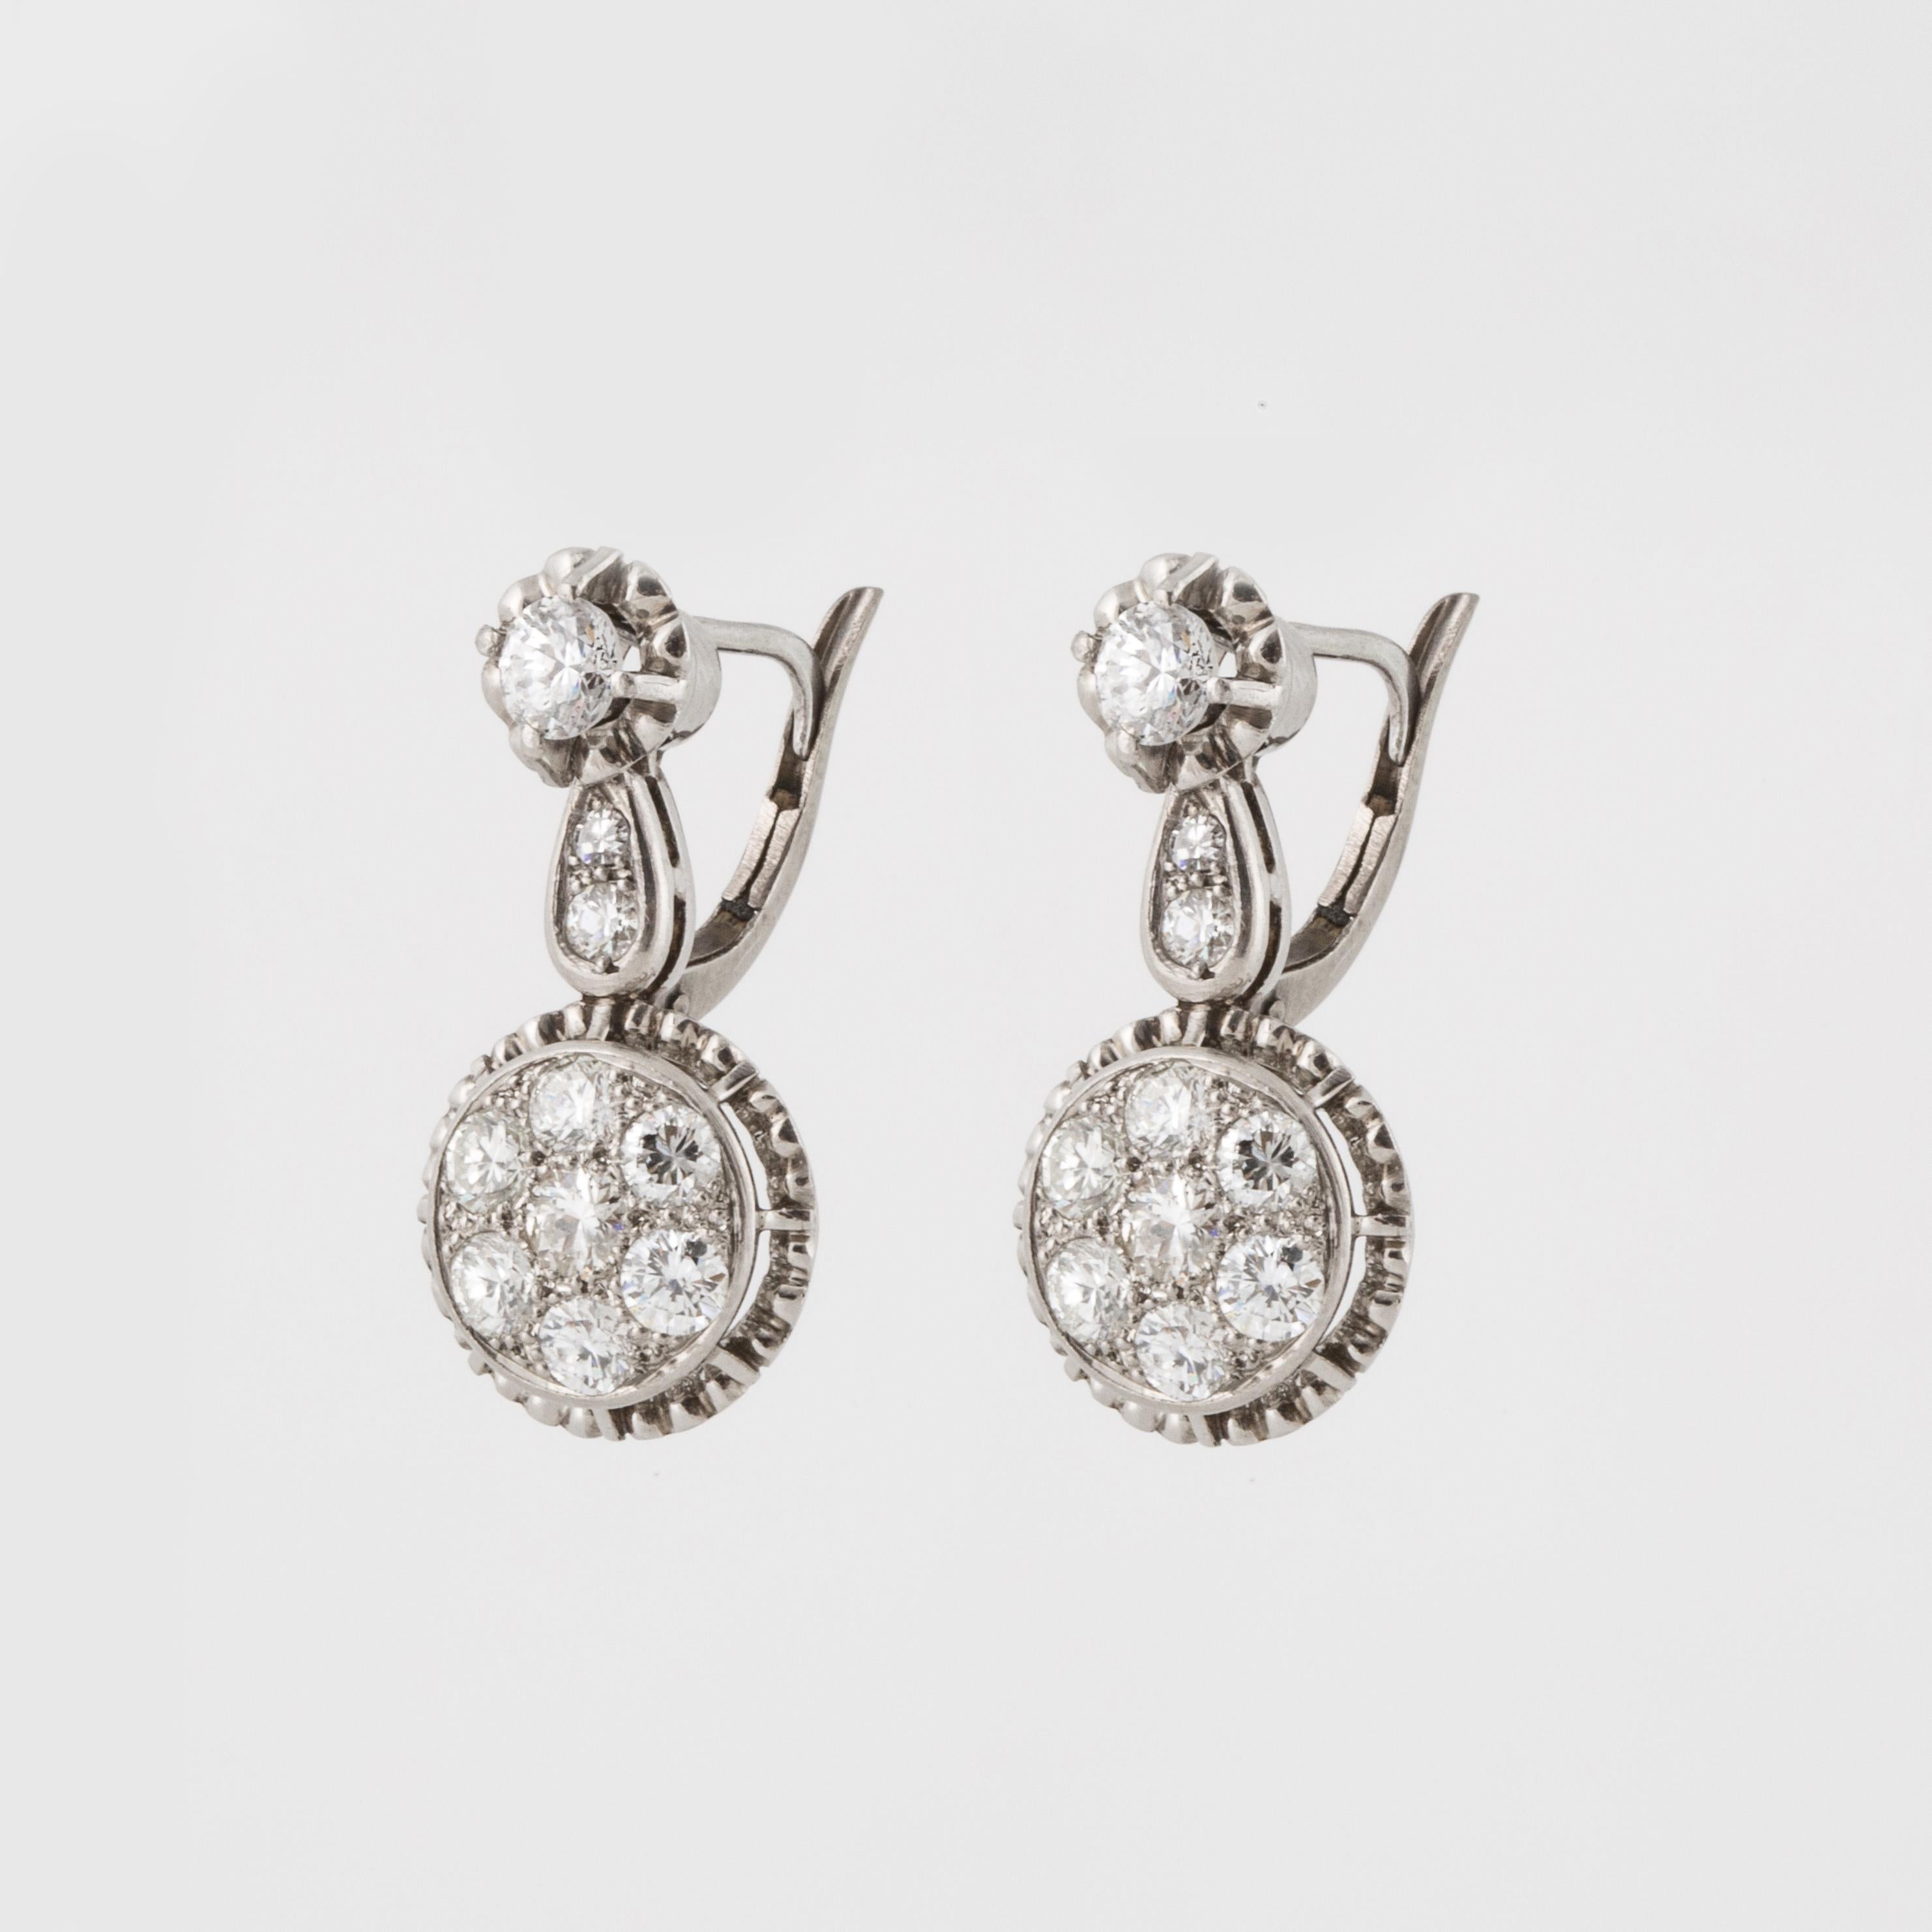 Platinum diamond earrings with 18K white gold backs.  Vintage buttercup mounting holding the top diamonds, then a drop of diamonds in a circle.  There are a total of 20 round diamonds that total 1.90 carats; H-J color and VS1-SI2 clarity.  They